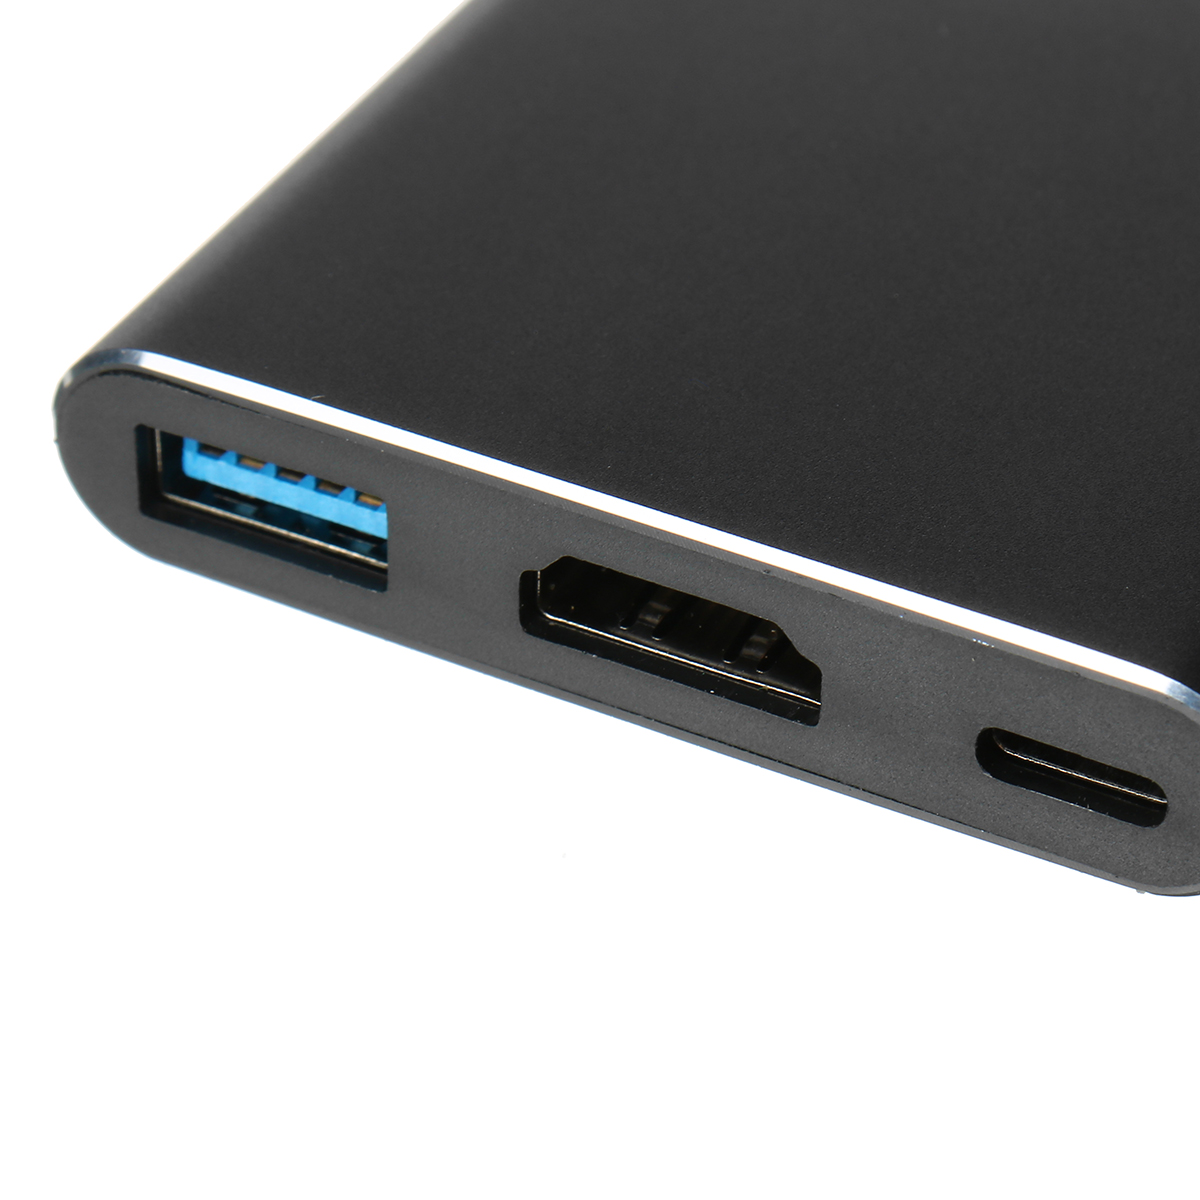 USB30-Docking-Station-Type-C-to-HDMI-USB-HUB-Adapter-Support-4K-30HZ-for-Notebook-MacBook-Expansion--1688311-7